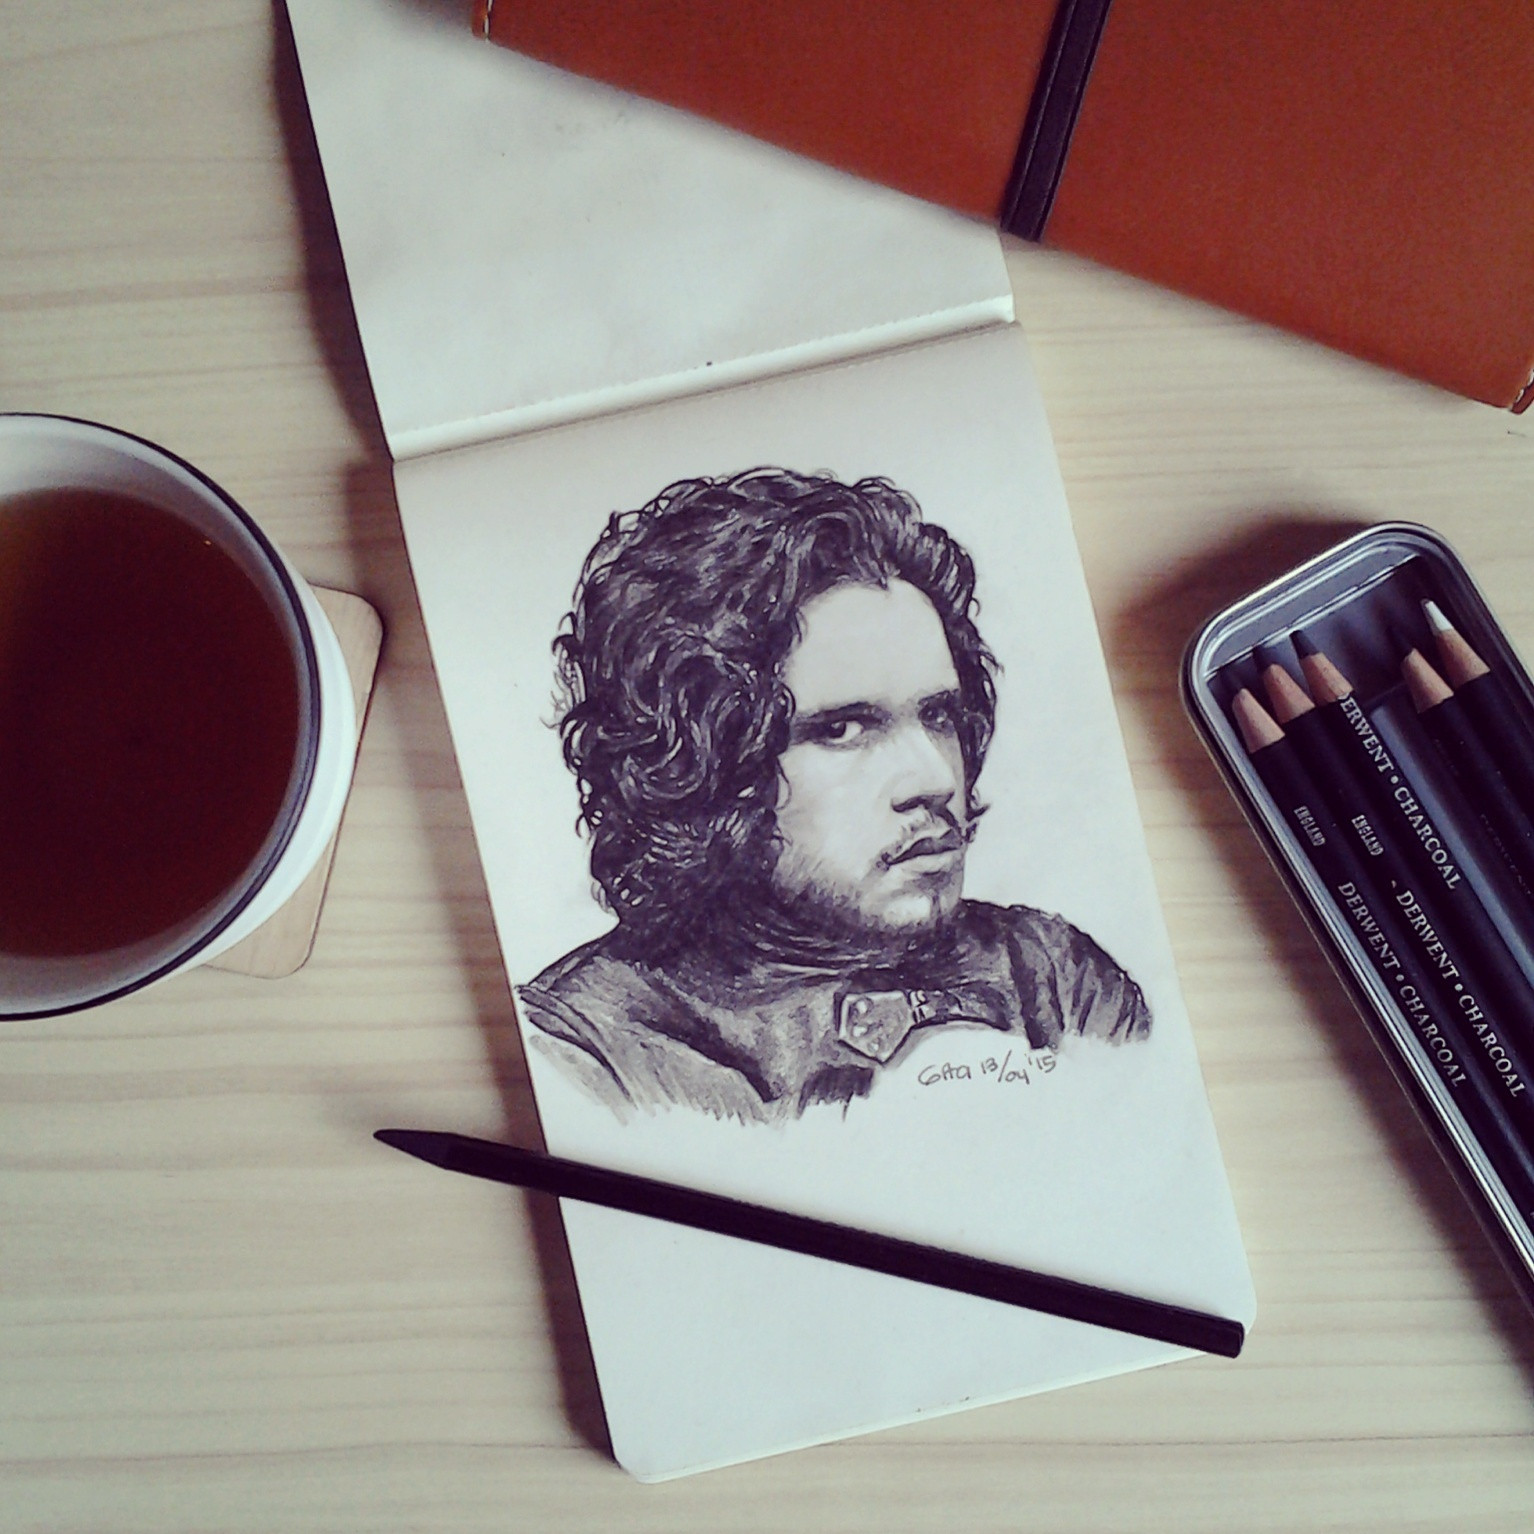 “You know nothing Jon Snow” – Charcoal Drawing on Moleskine Sketchbook